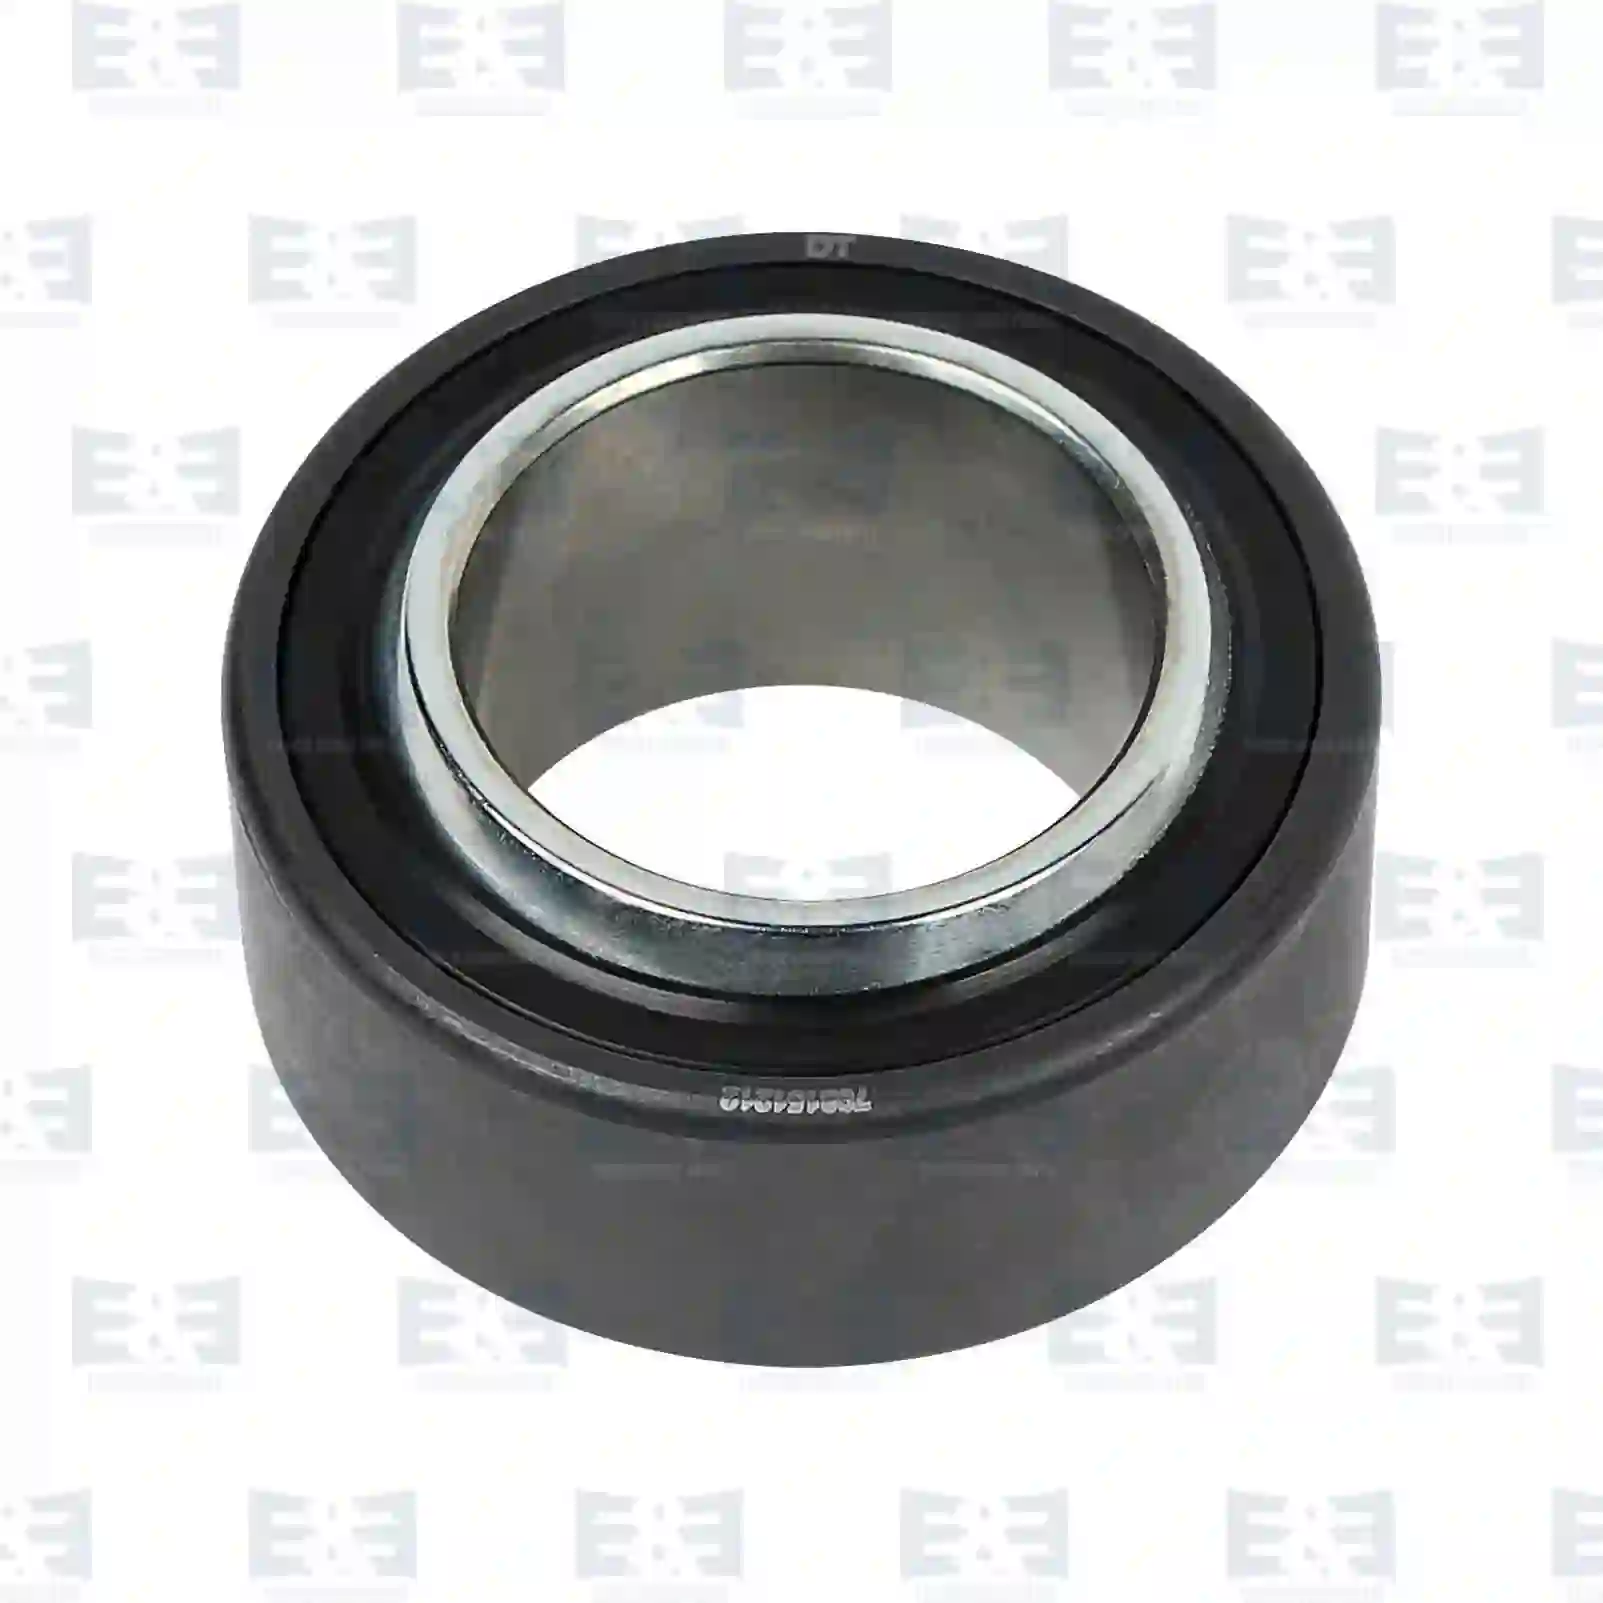 Release Lever Joint bearing, EE No 2E2289156 ,  oem no:06369500309, 5001843448, 2V5141173A, ZG30332-0008 E&E Truck Spare Parts | Truck Spare Parts, Auotomotive Spare Parts